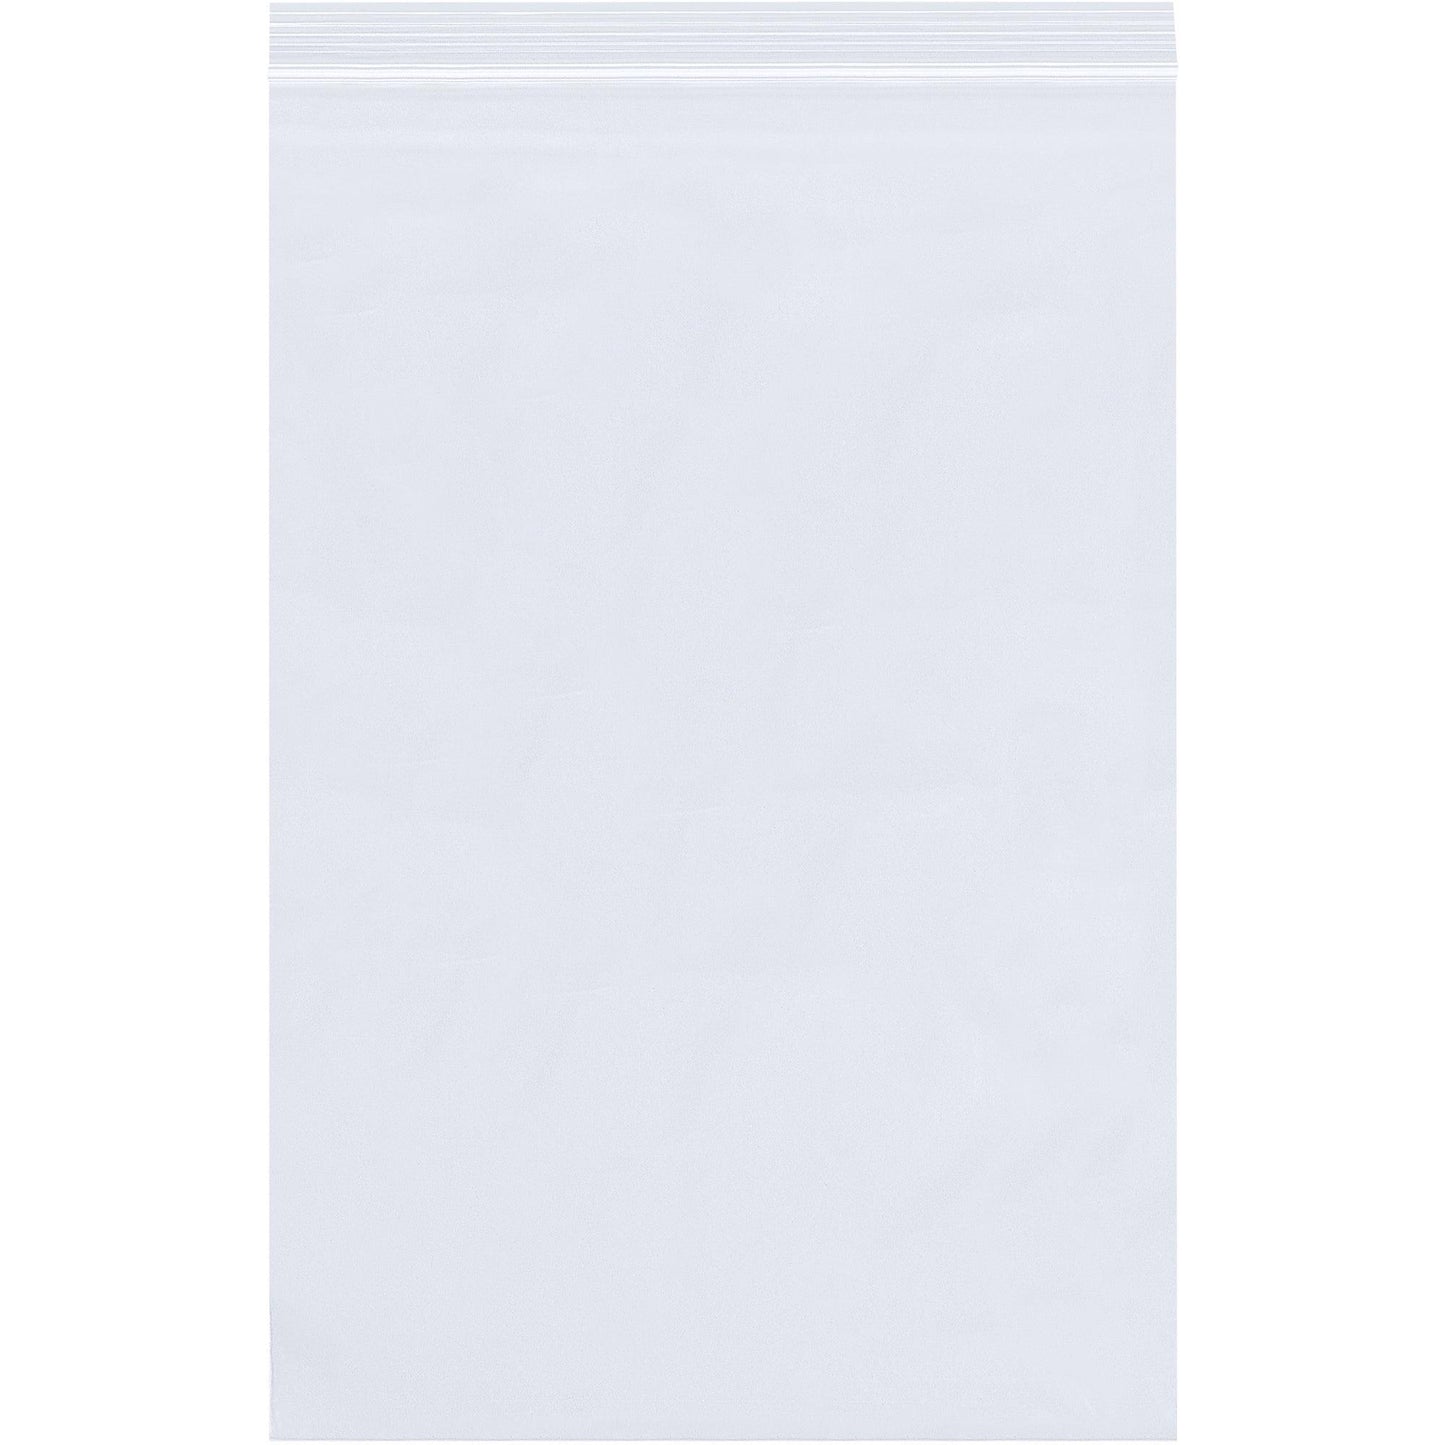 18 x 24" - 4 Mil Reclosable Poly Bags - PB3834